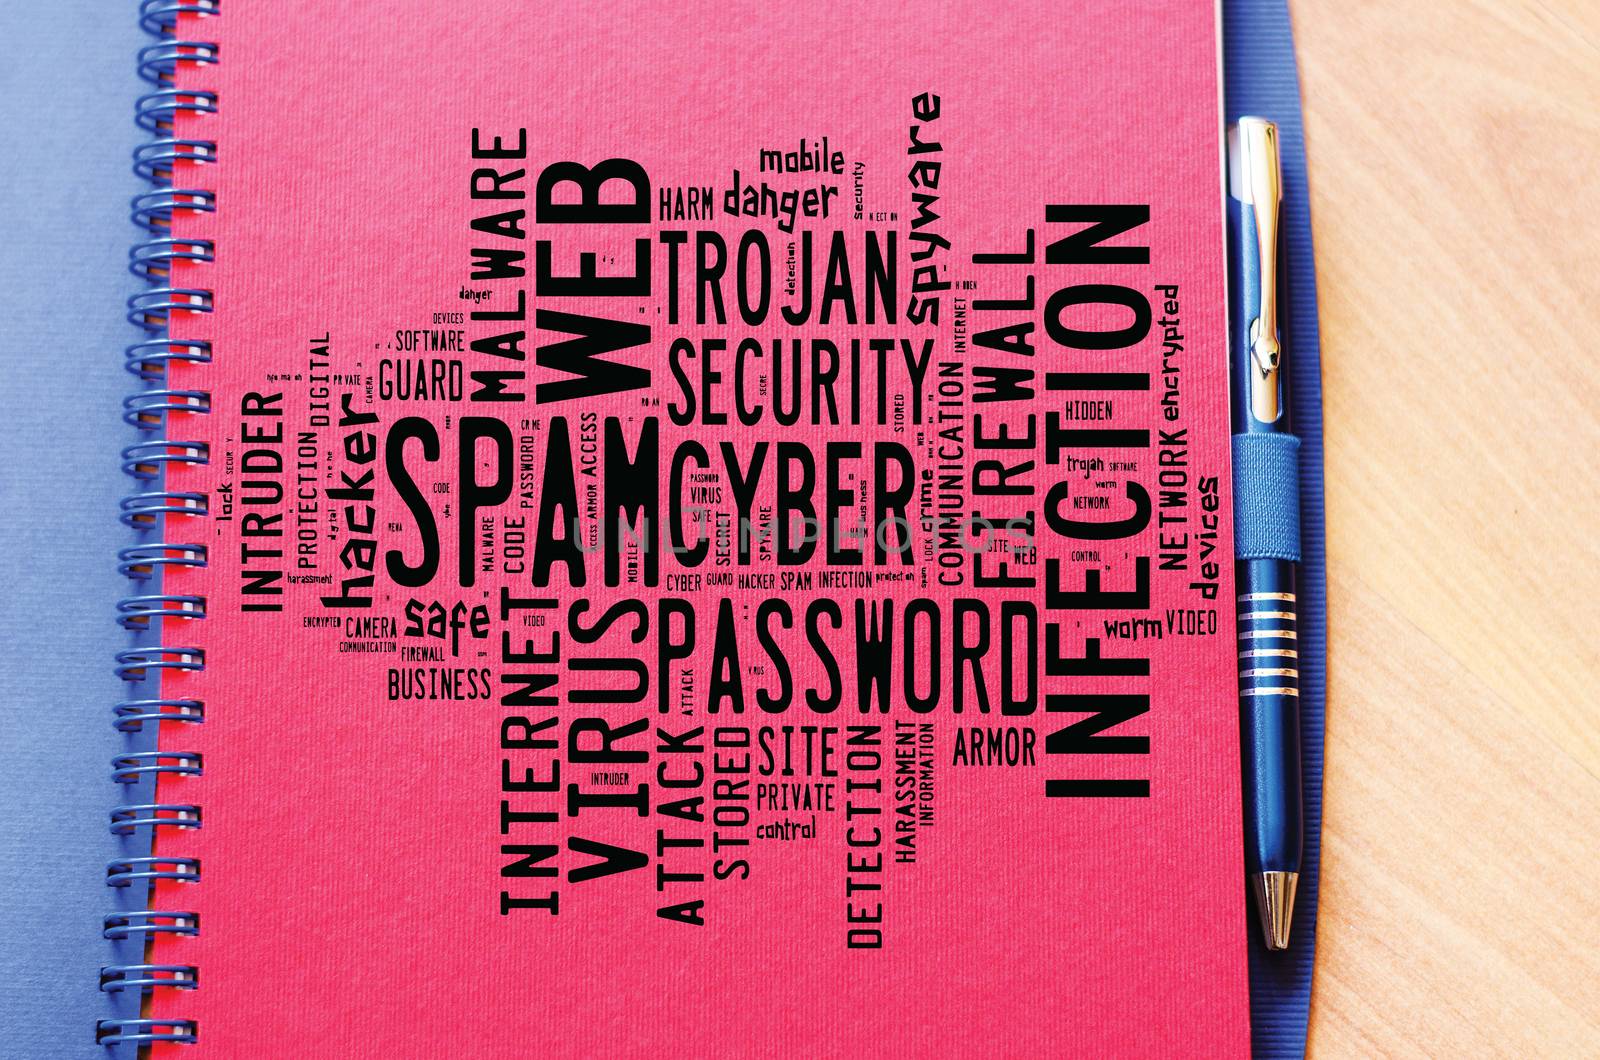 Spam word cloud collage by eenevski